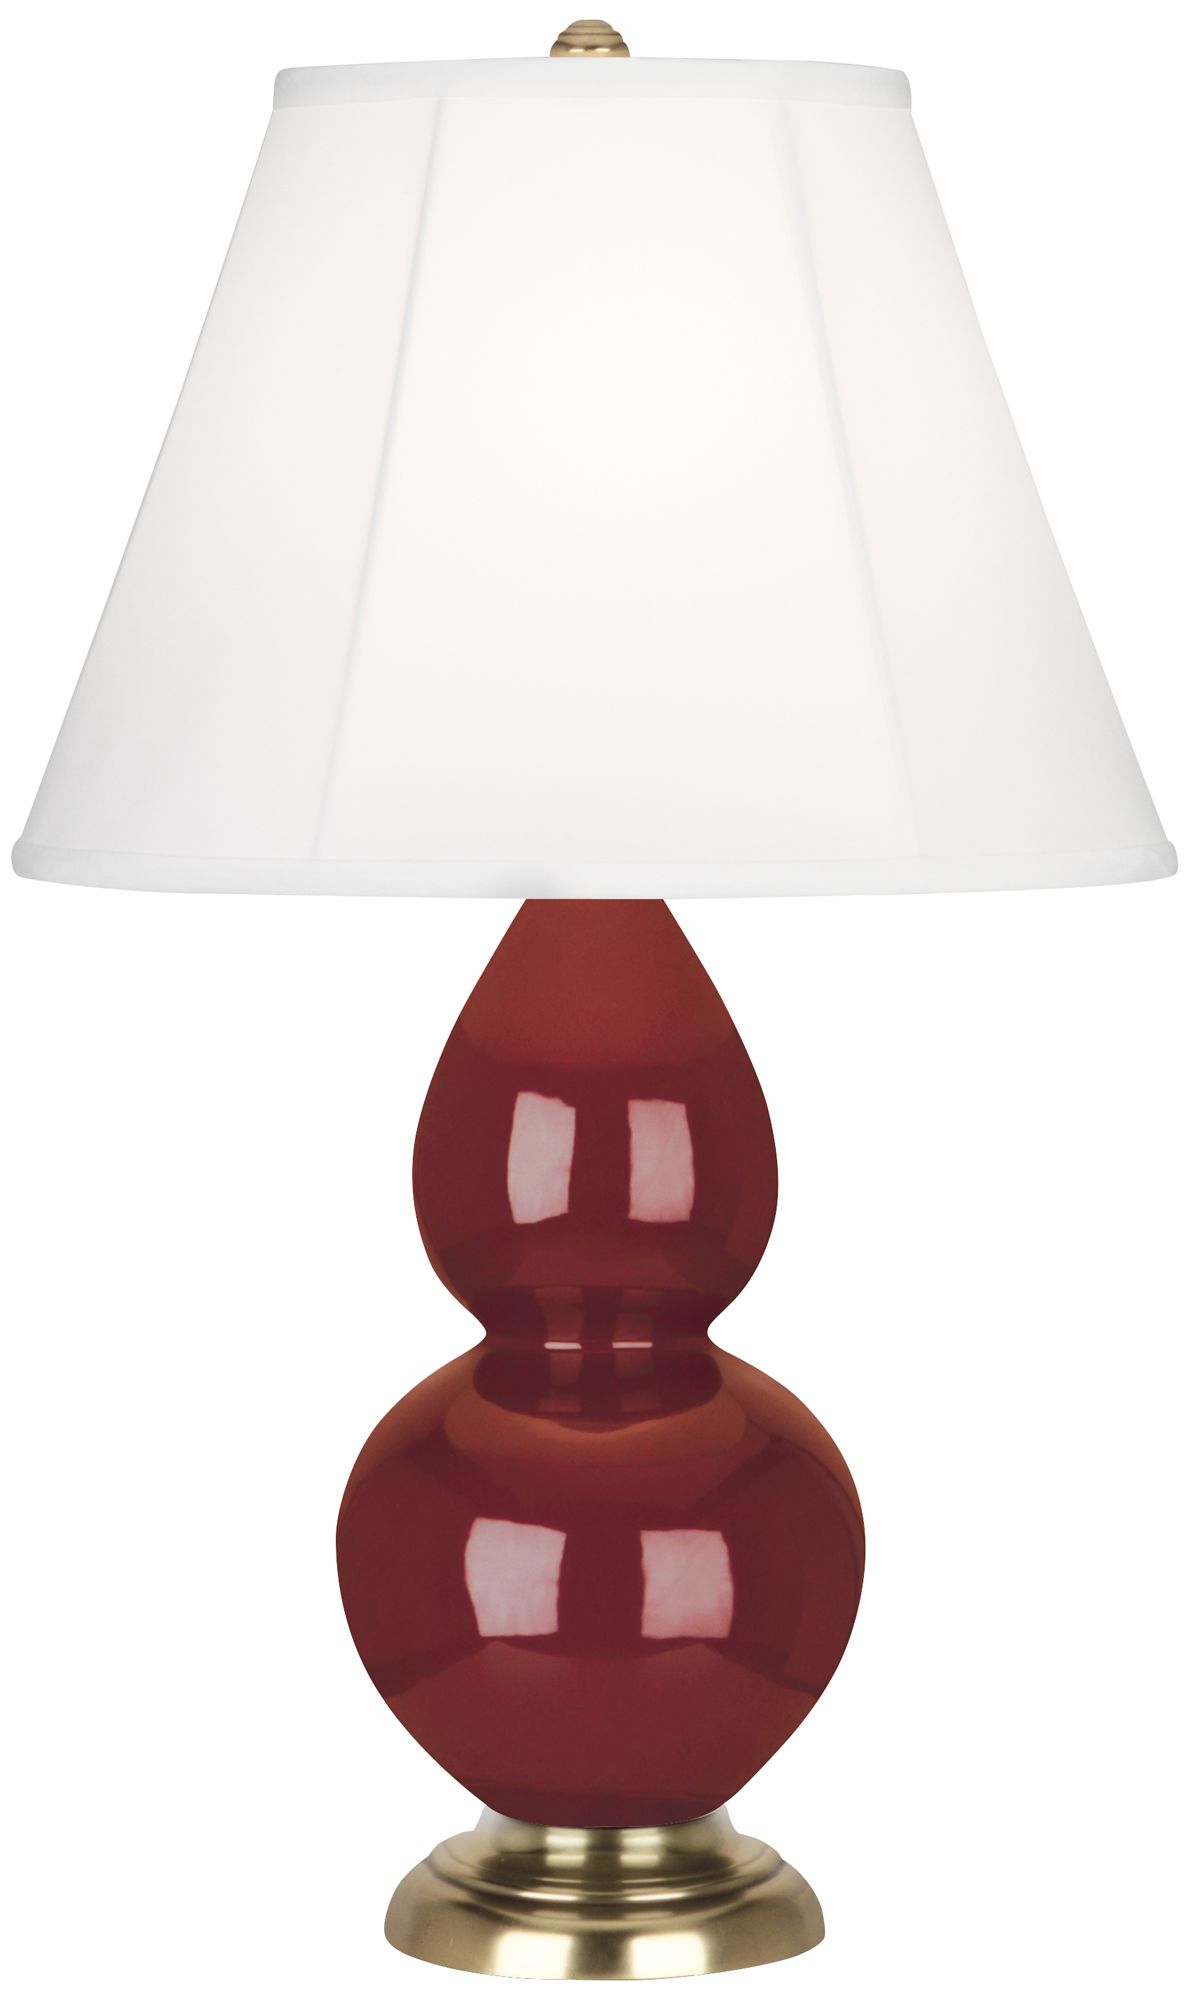 Robert Abbey Ceramic Oxblood Small Double Gourd Accent Lamp